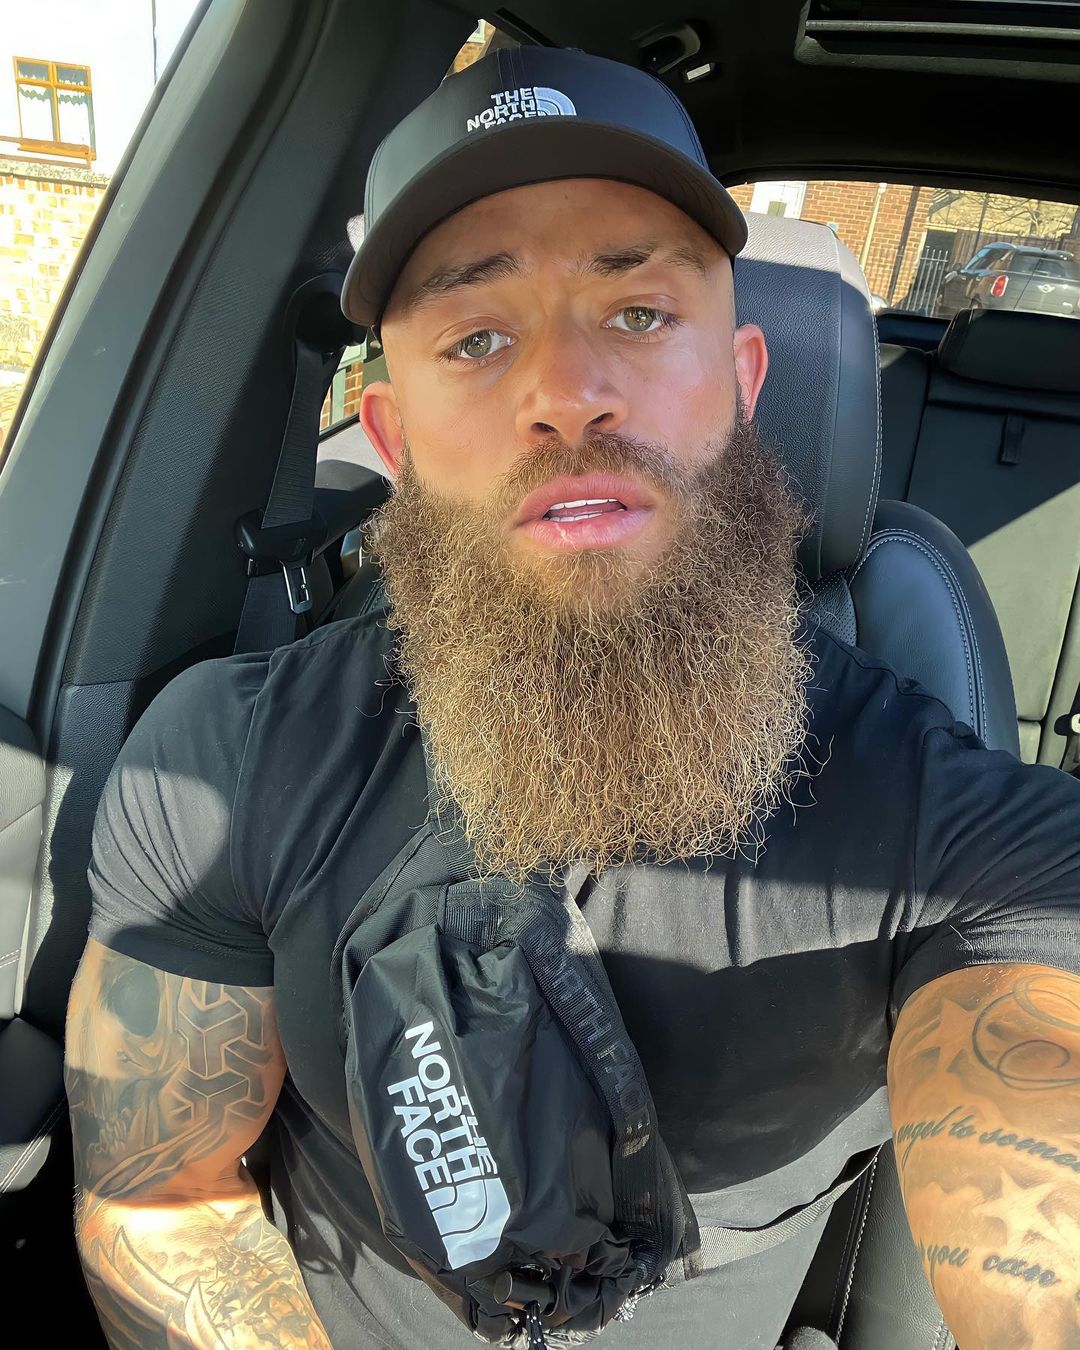 Ashley Cain sitting in his car in black t-shirt and cap